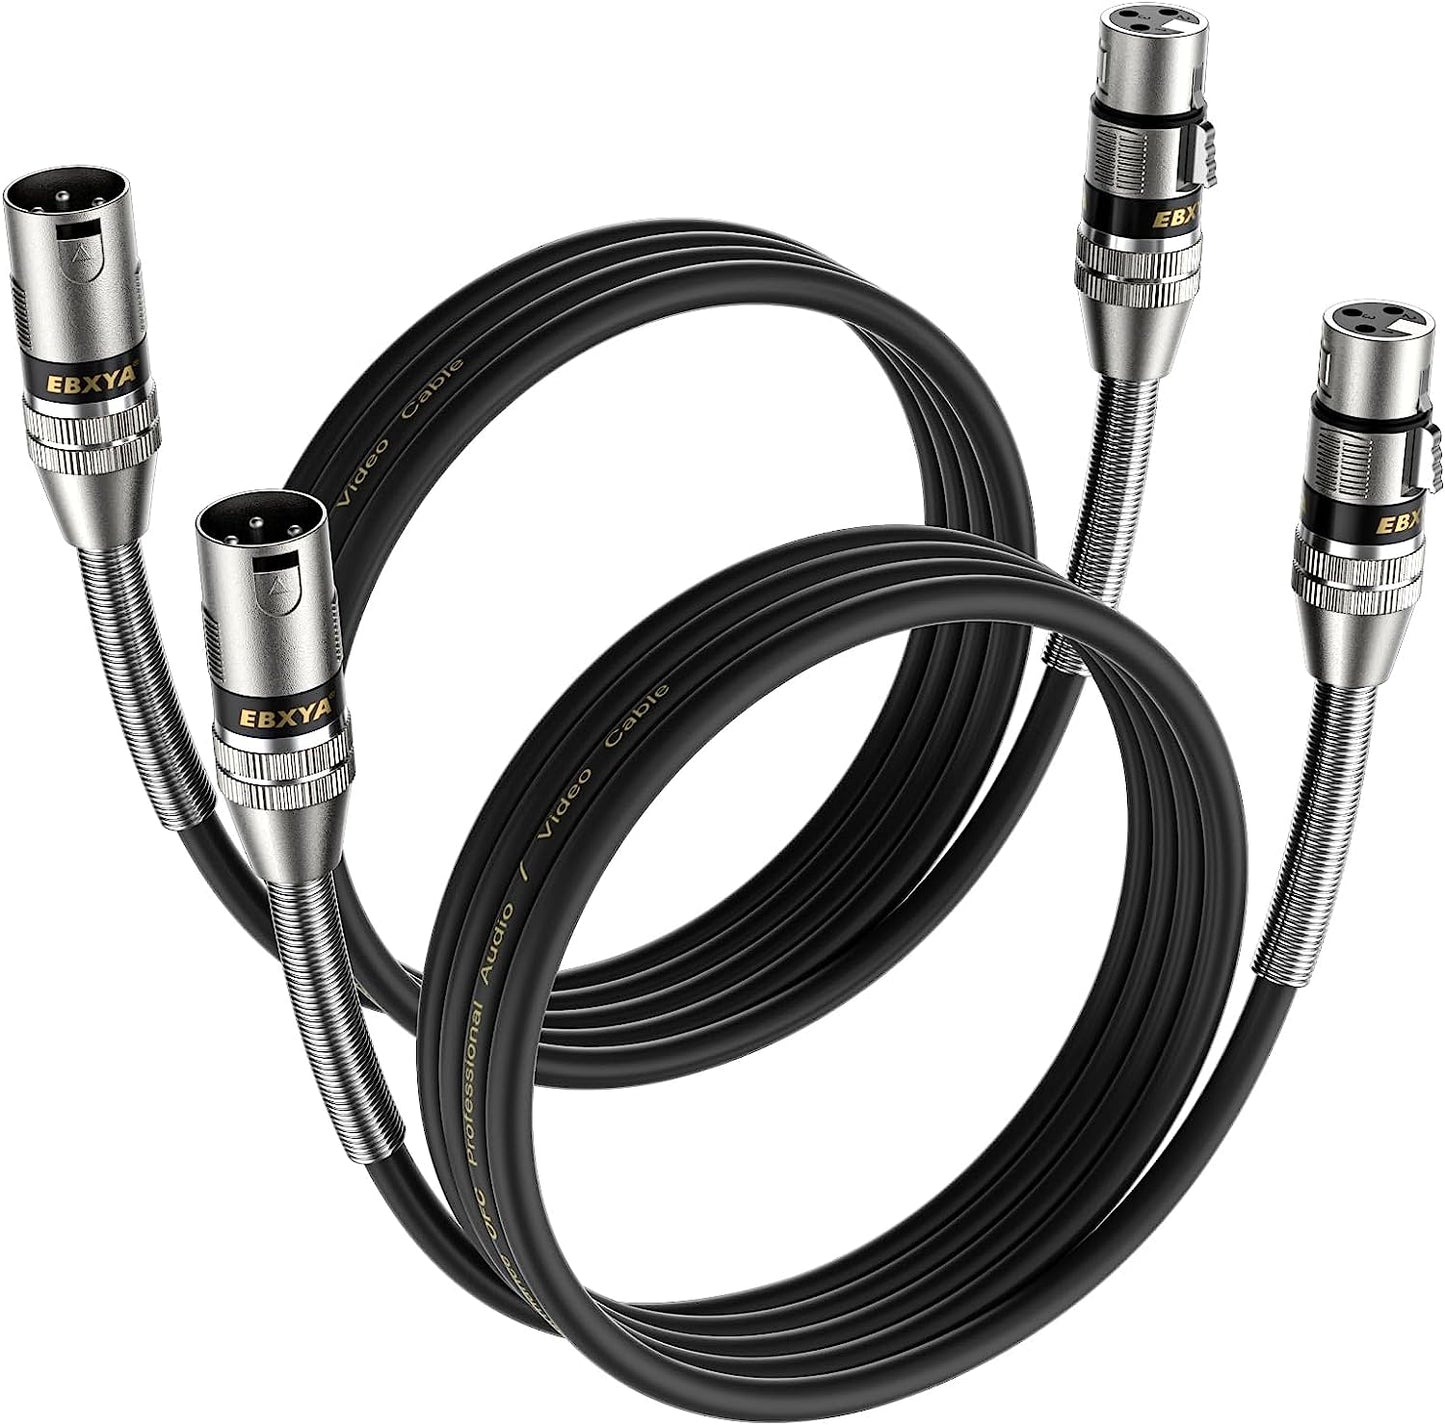 EBXYA XLR Cables, XLR Male to Female Balanced 3 Pin Metal Spring Microphone Cable Compatible with Mixers, Speakers, Amplifiers, Mic